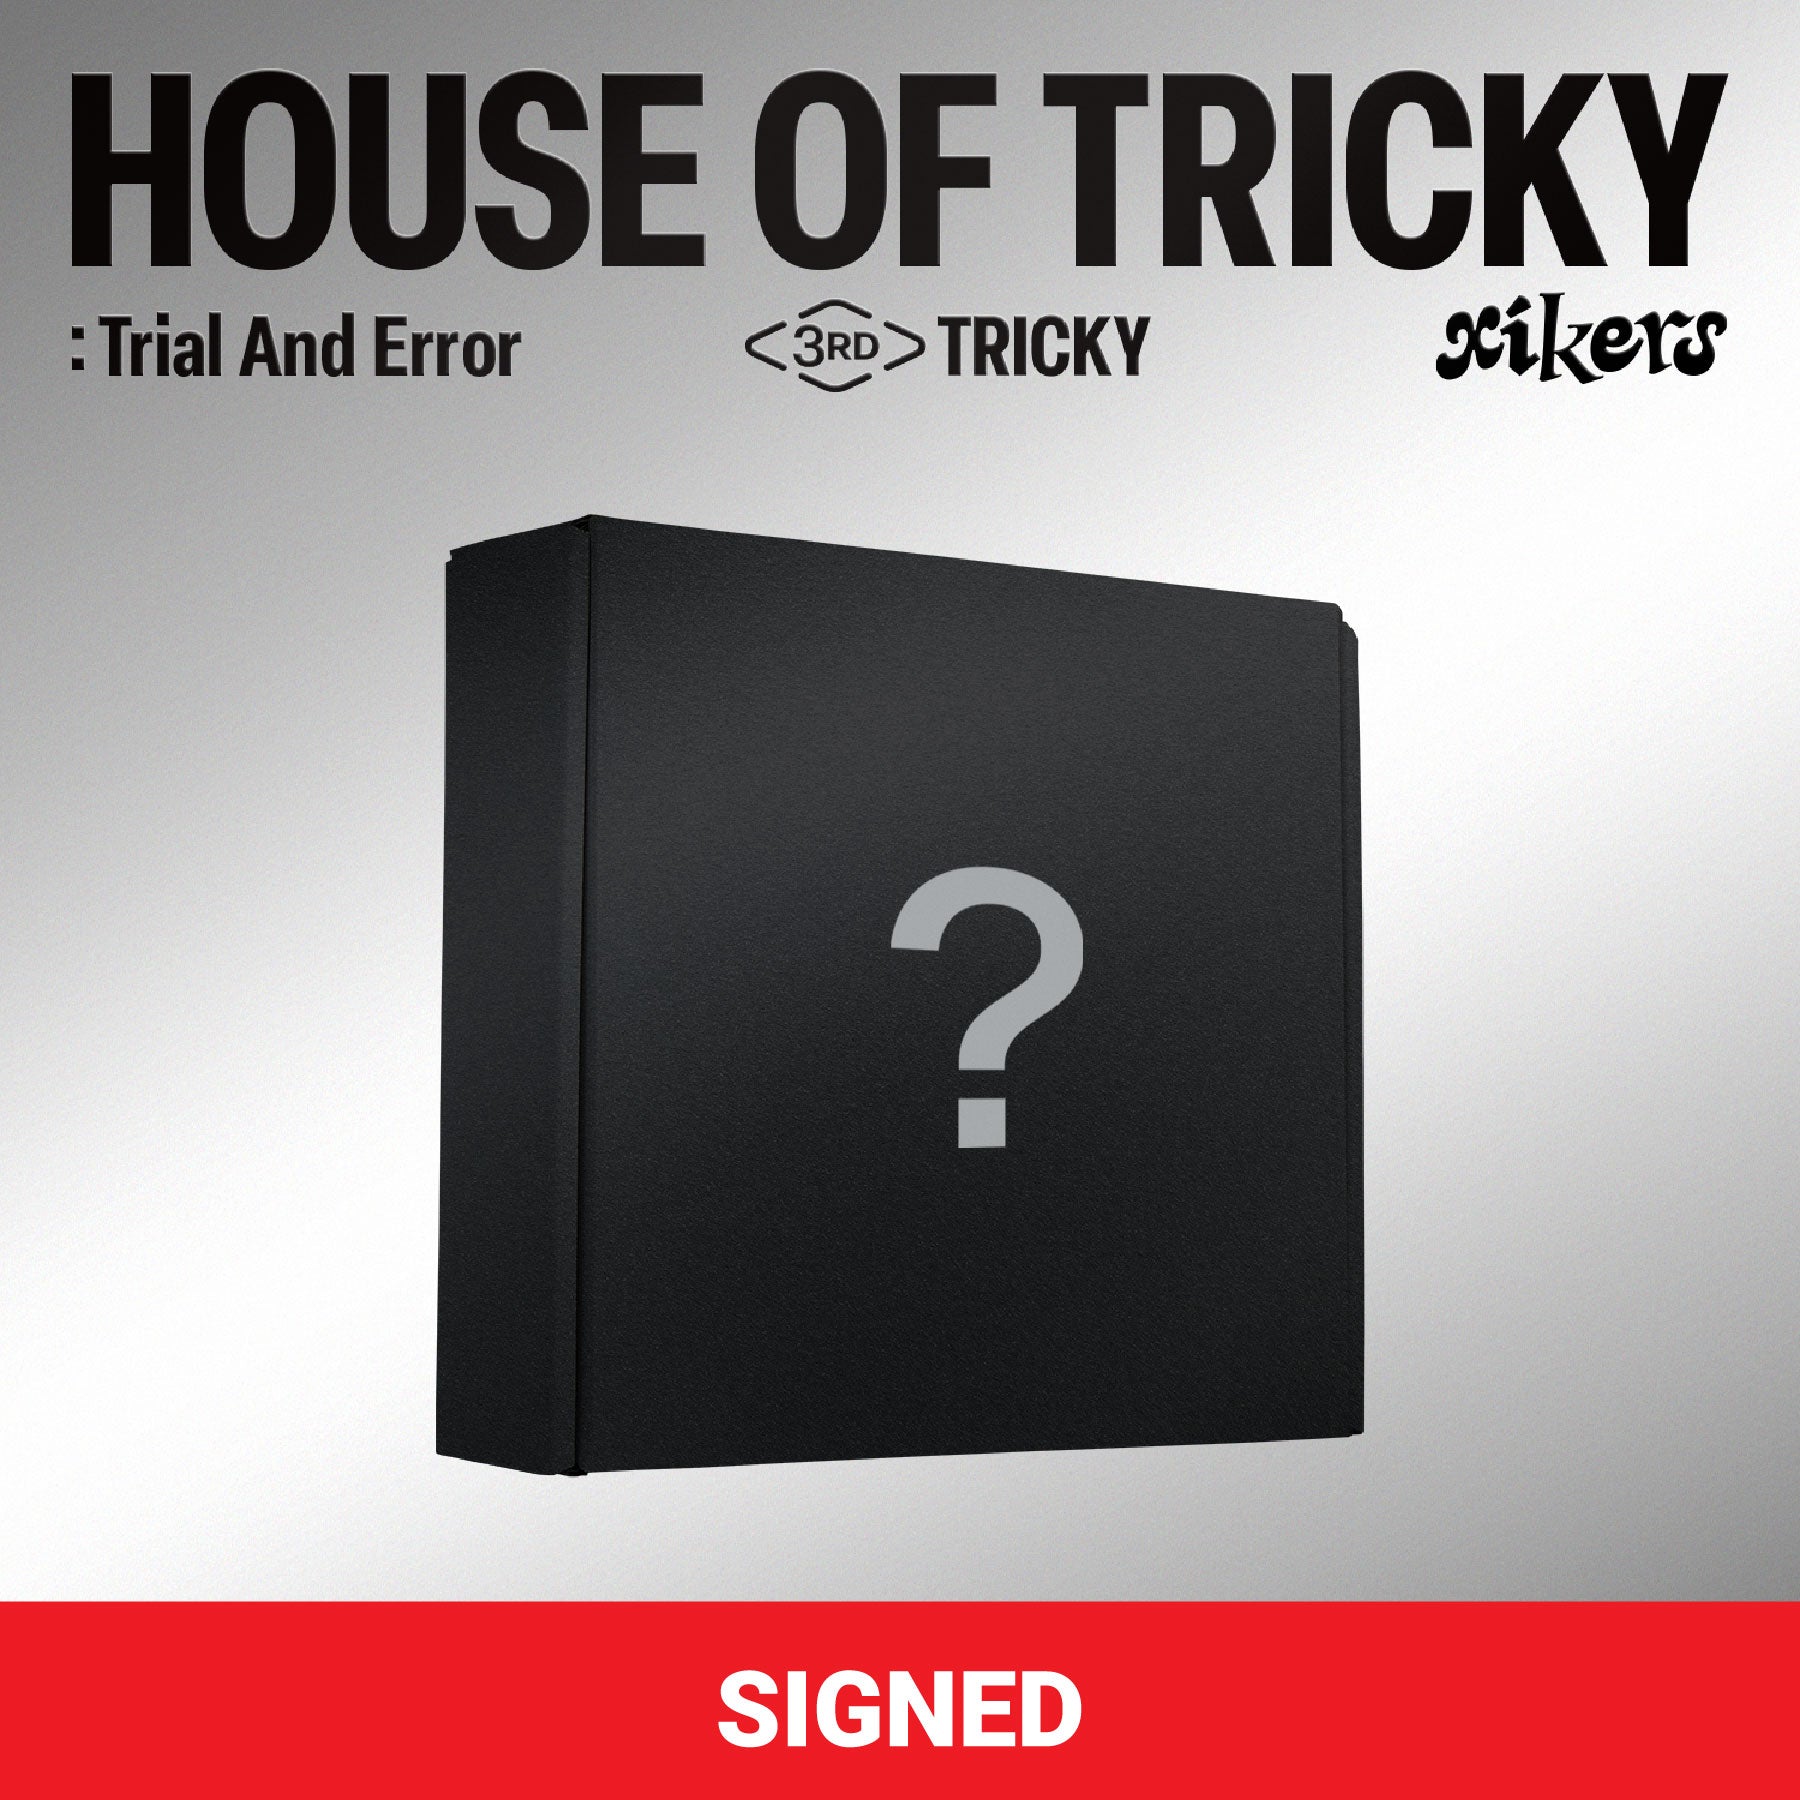 xikers - 3rd Mini-Album 'HOUSE OF TRICKY: Trial and Error' [SIGNED ALBUM]  (US Version)